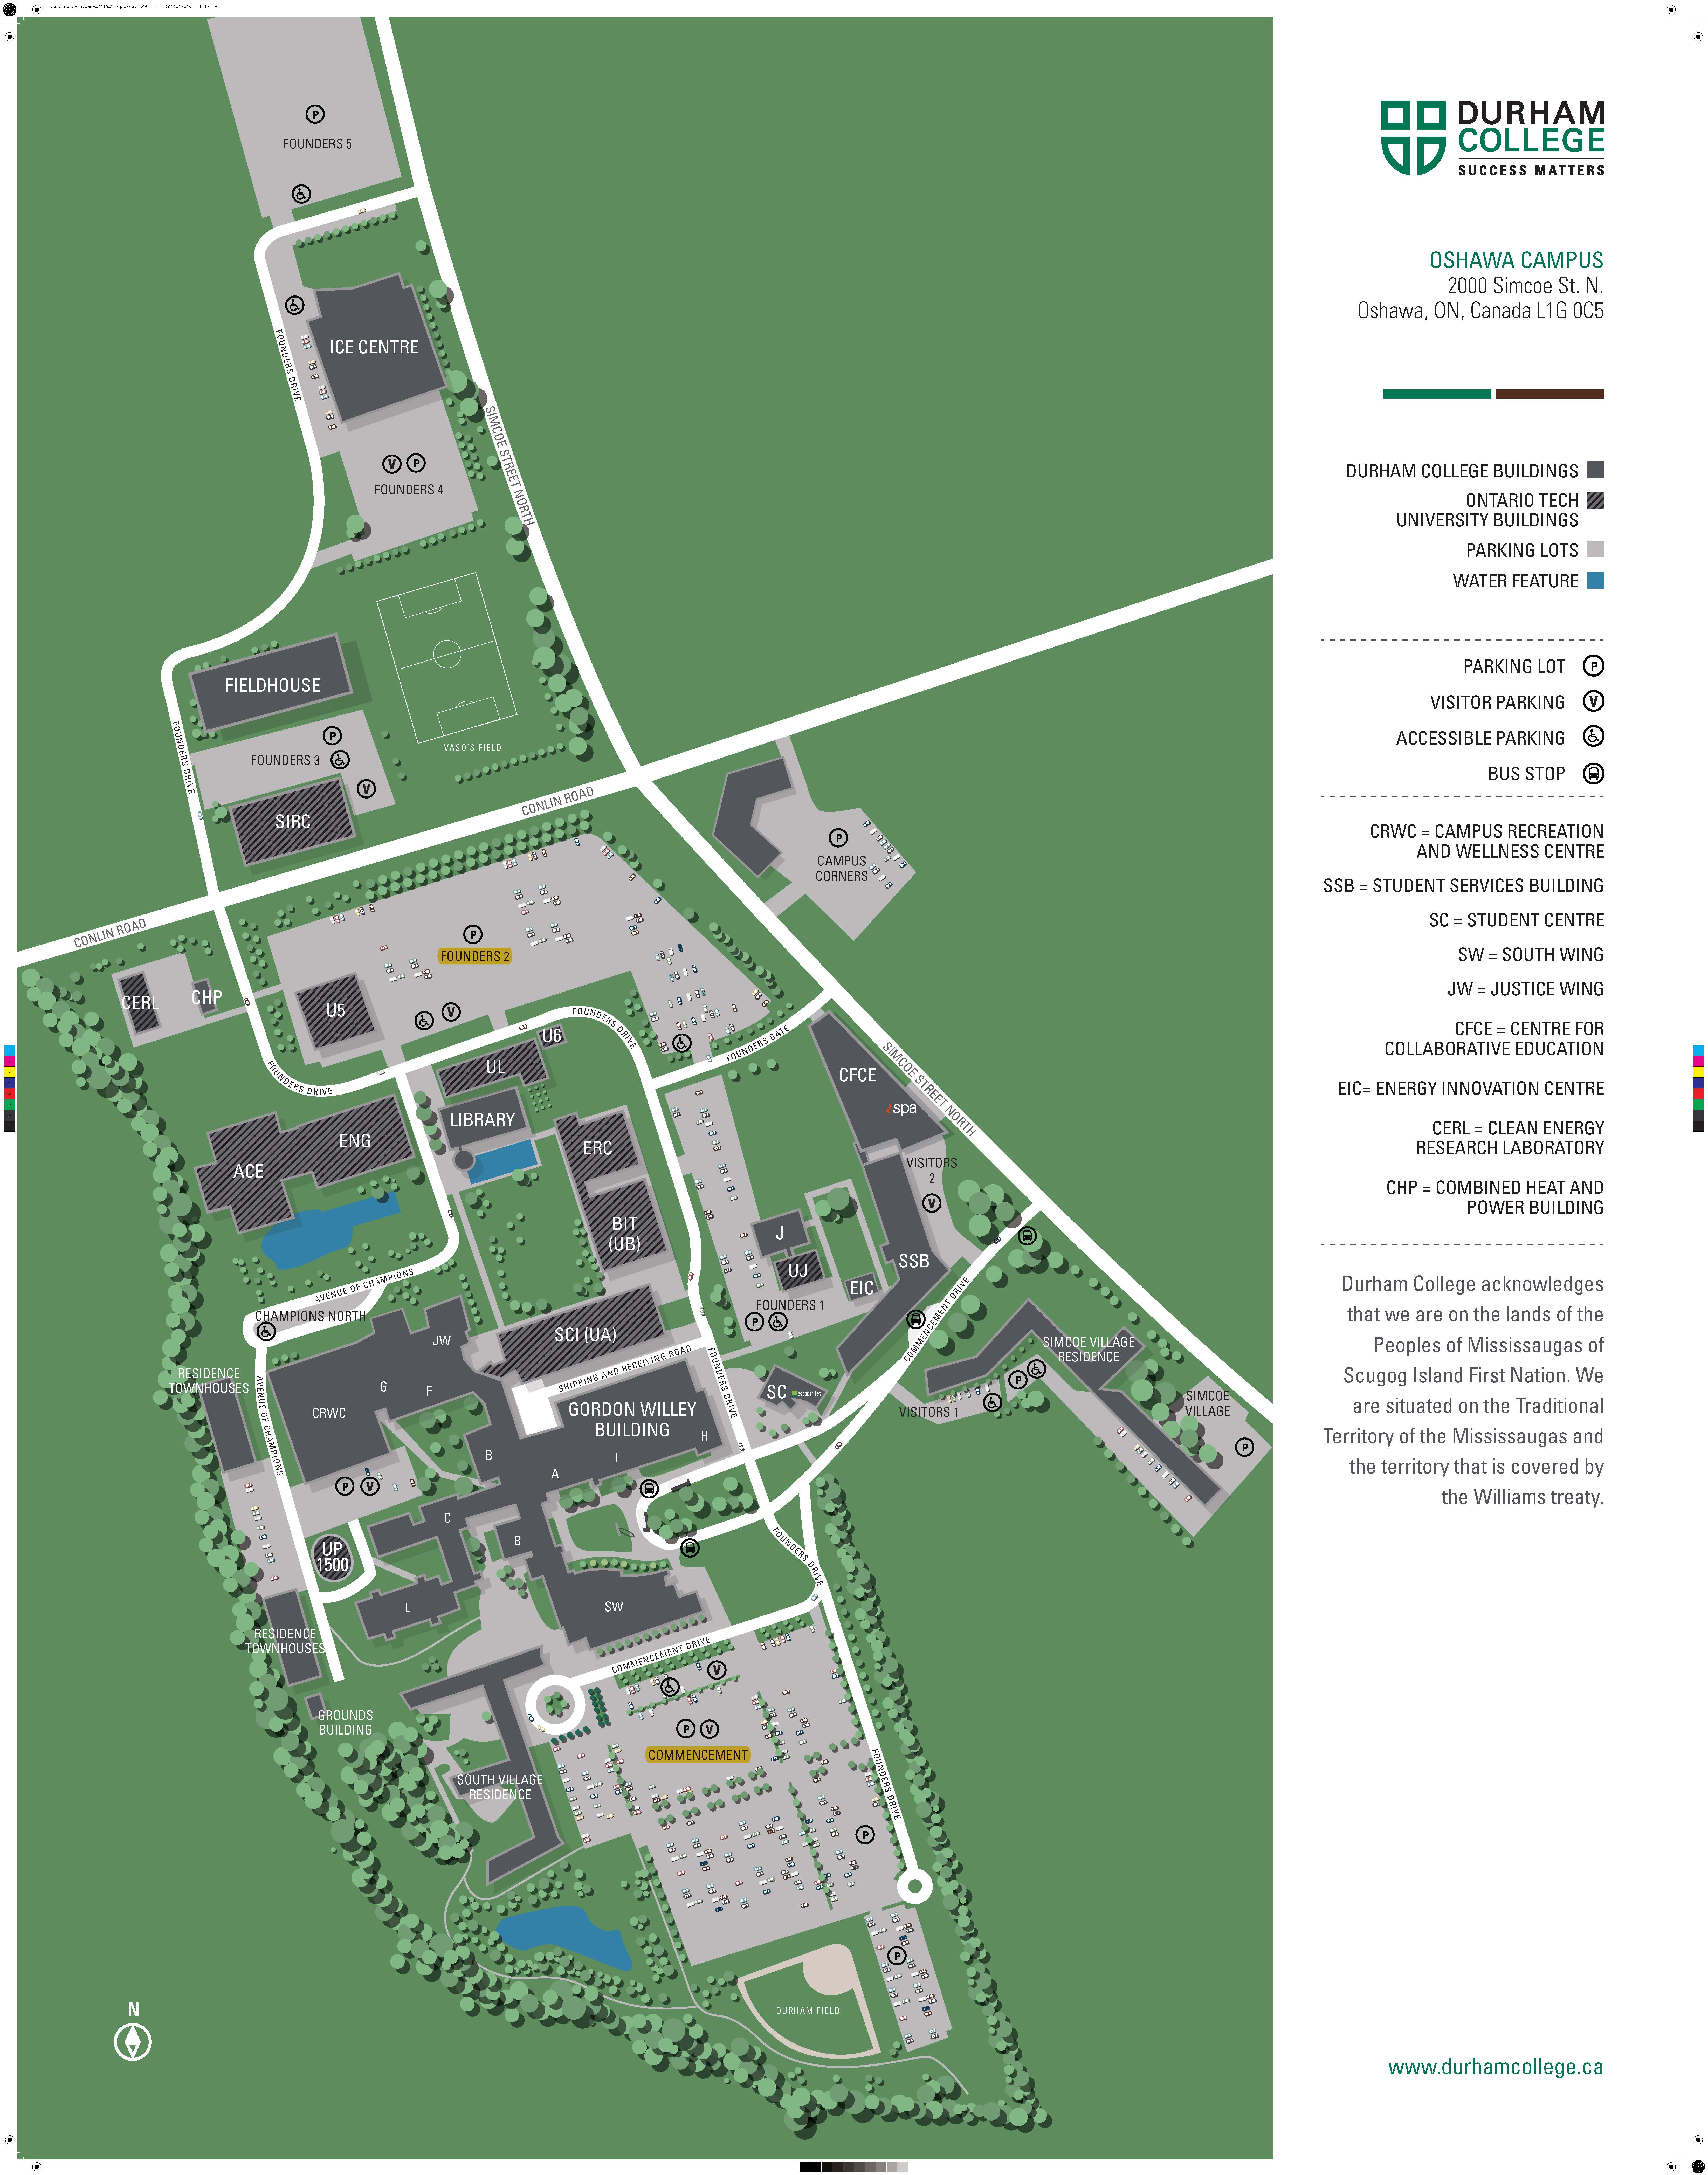 Map showing the location of buildings and parking lots of Durham College Campus/Ontario Tech University